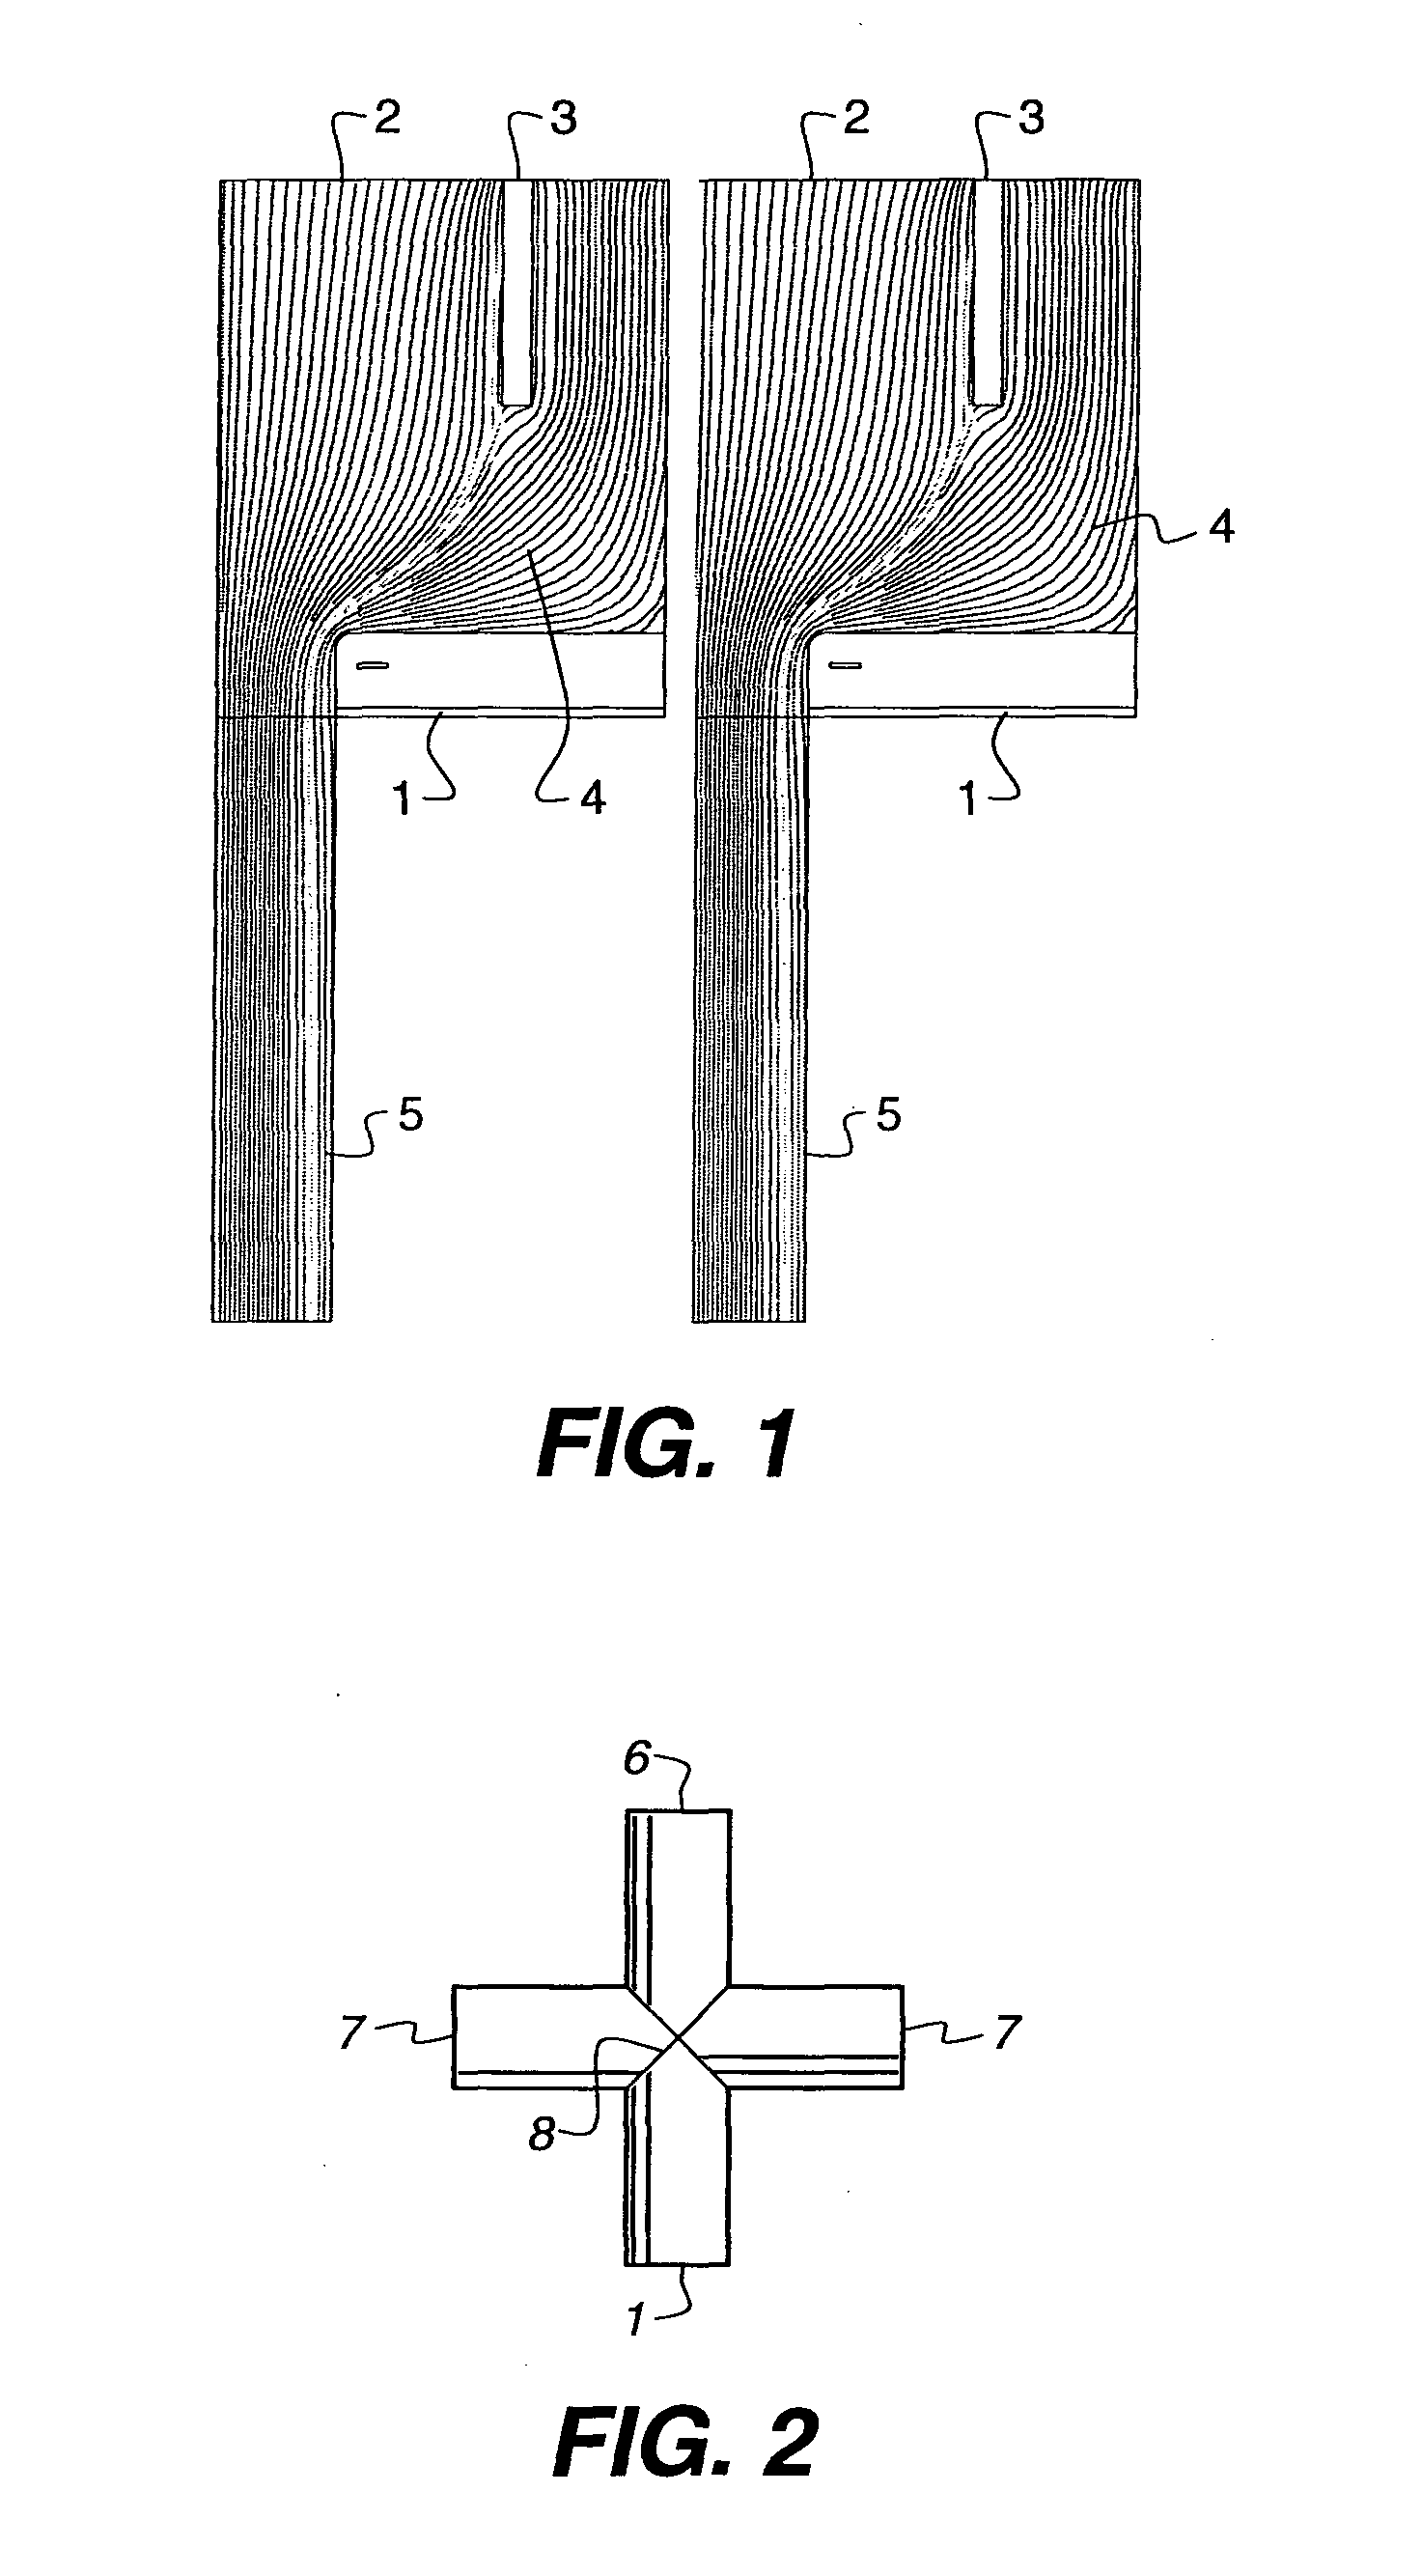 Method of continuous inkjet printing